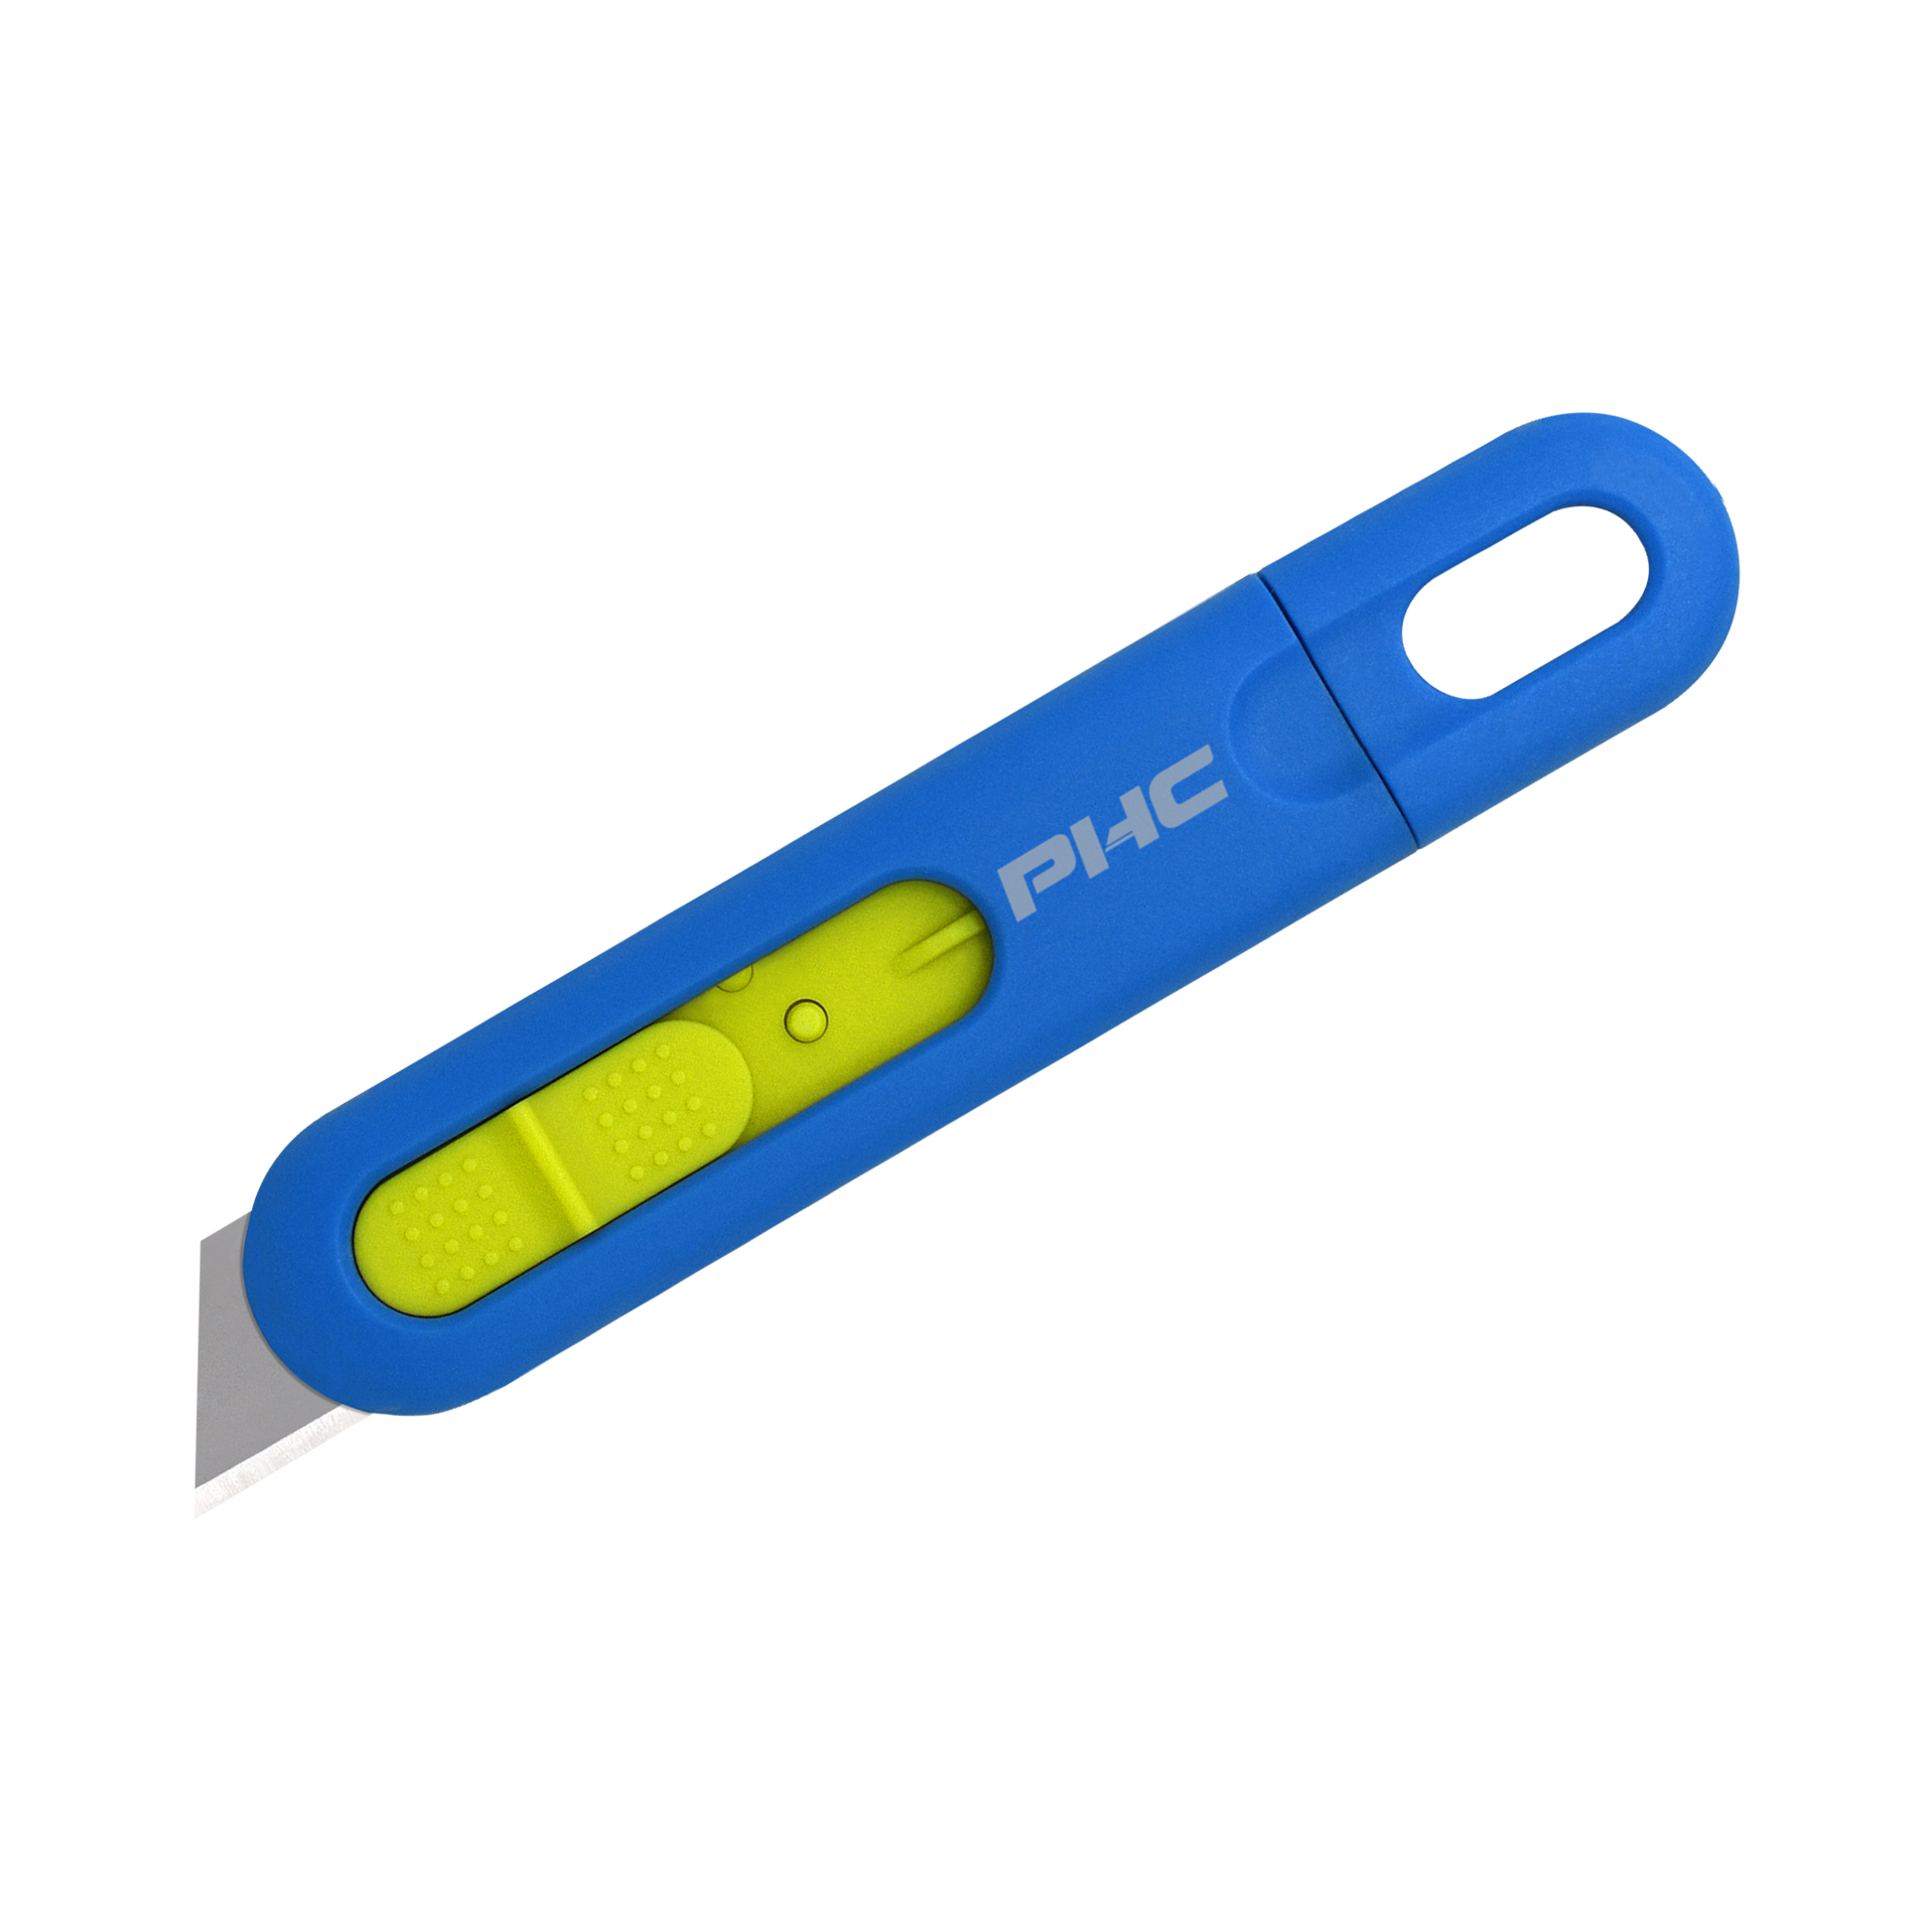 VOLO disposable auto-retract safety knife - DaltonSafety